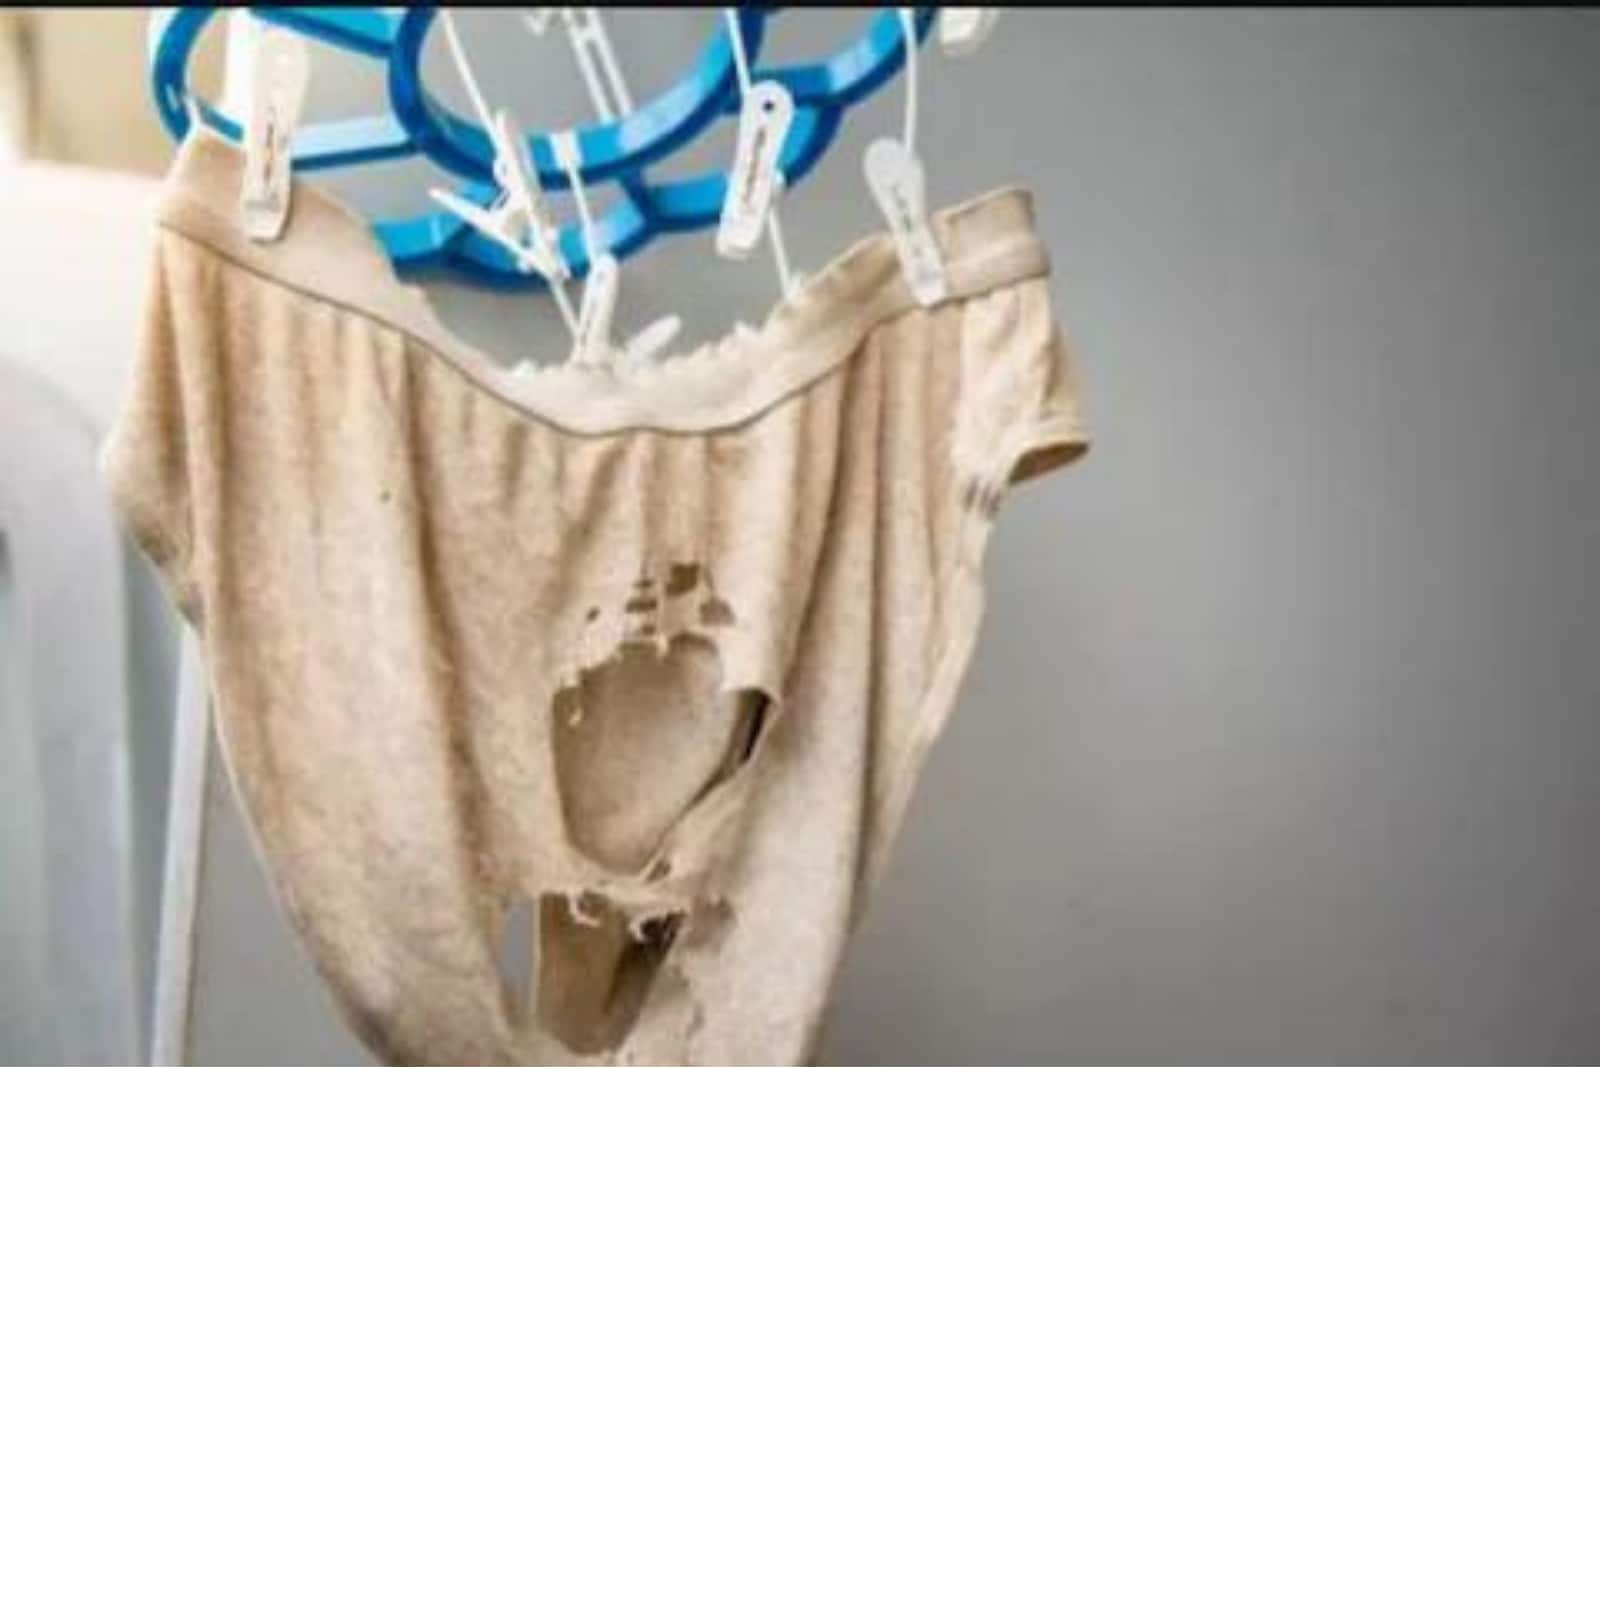 Common lingerie mistakes that are bad for your health - Times of India